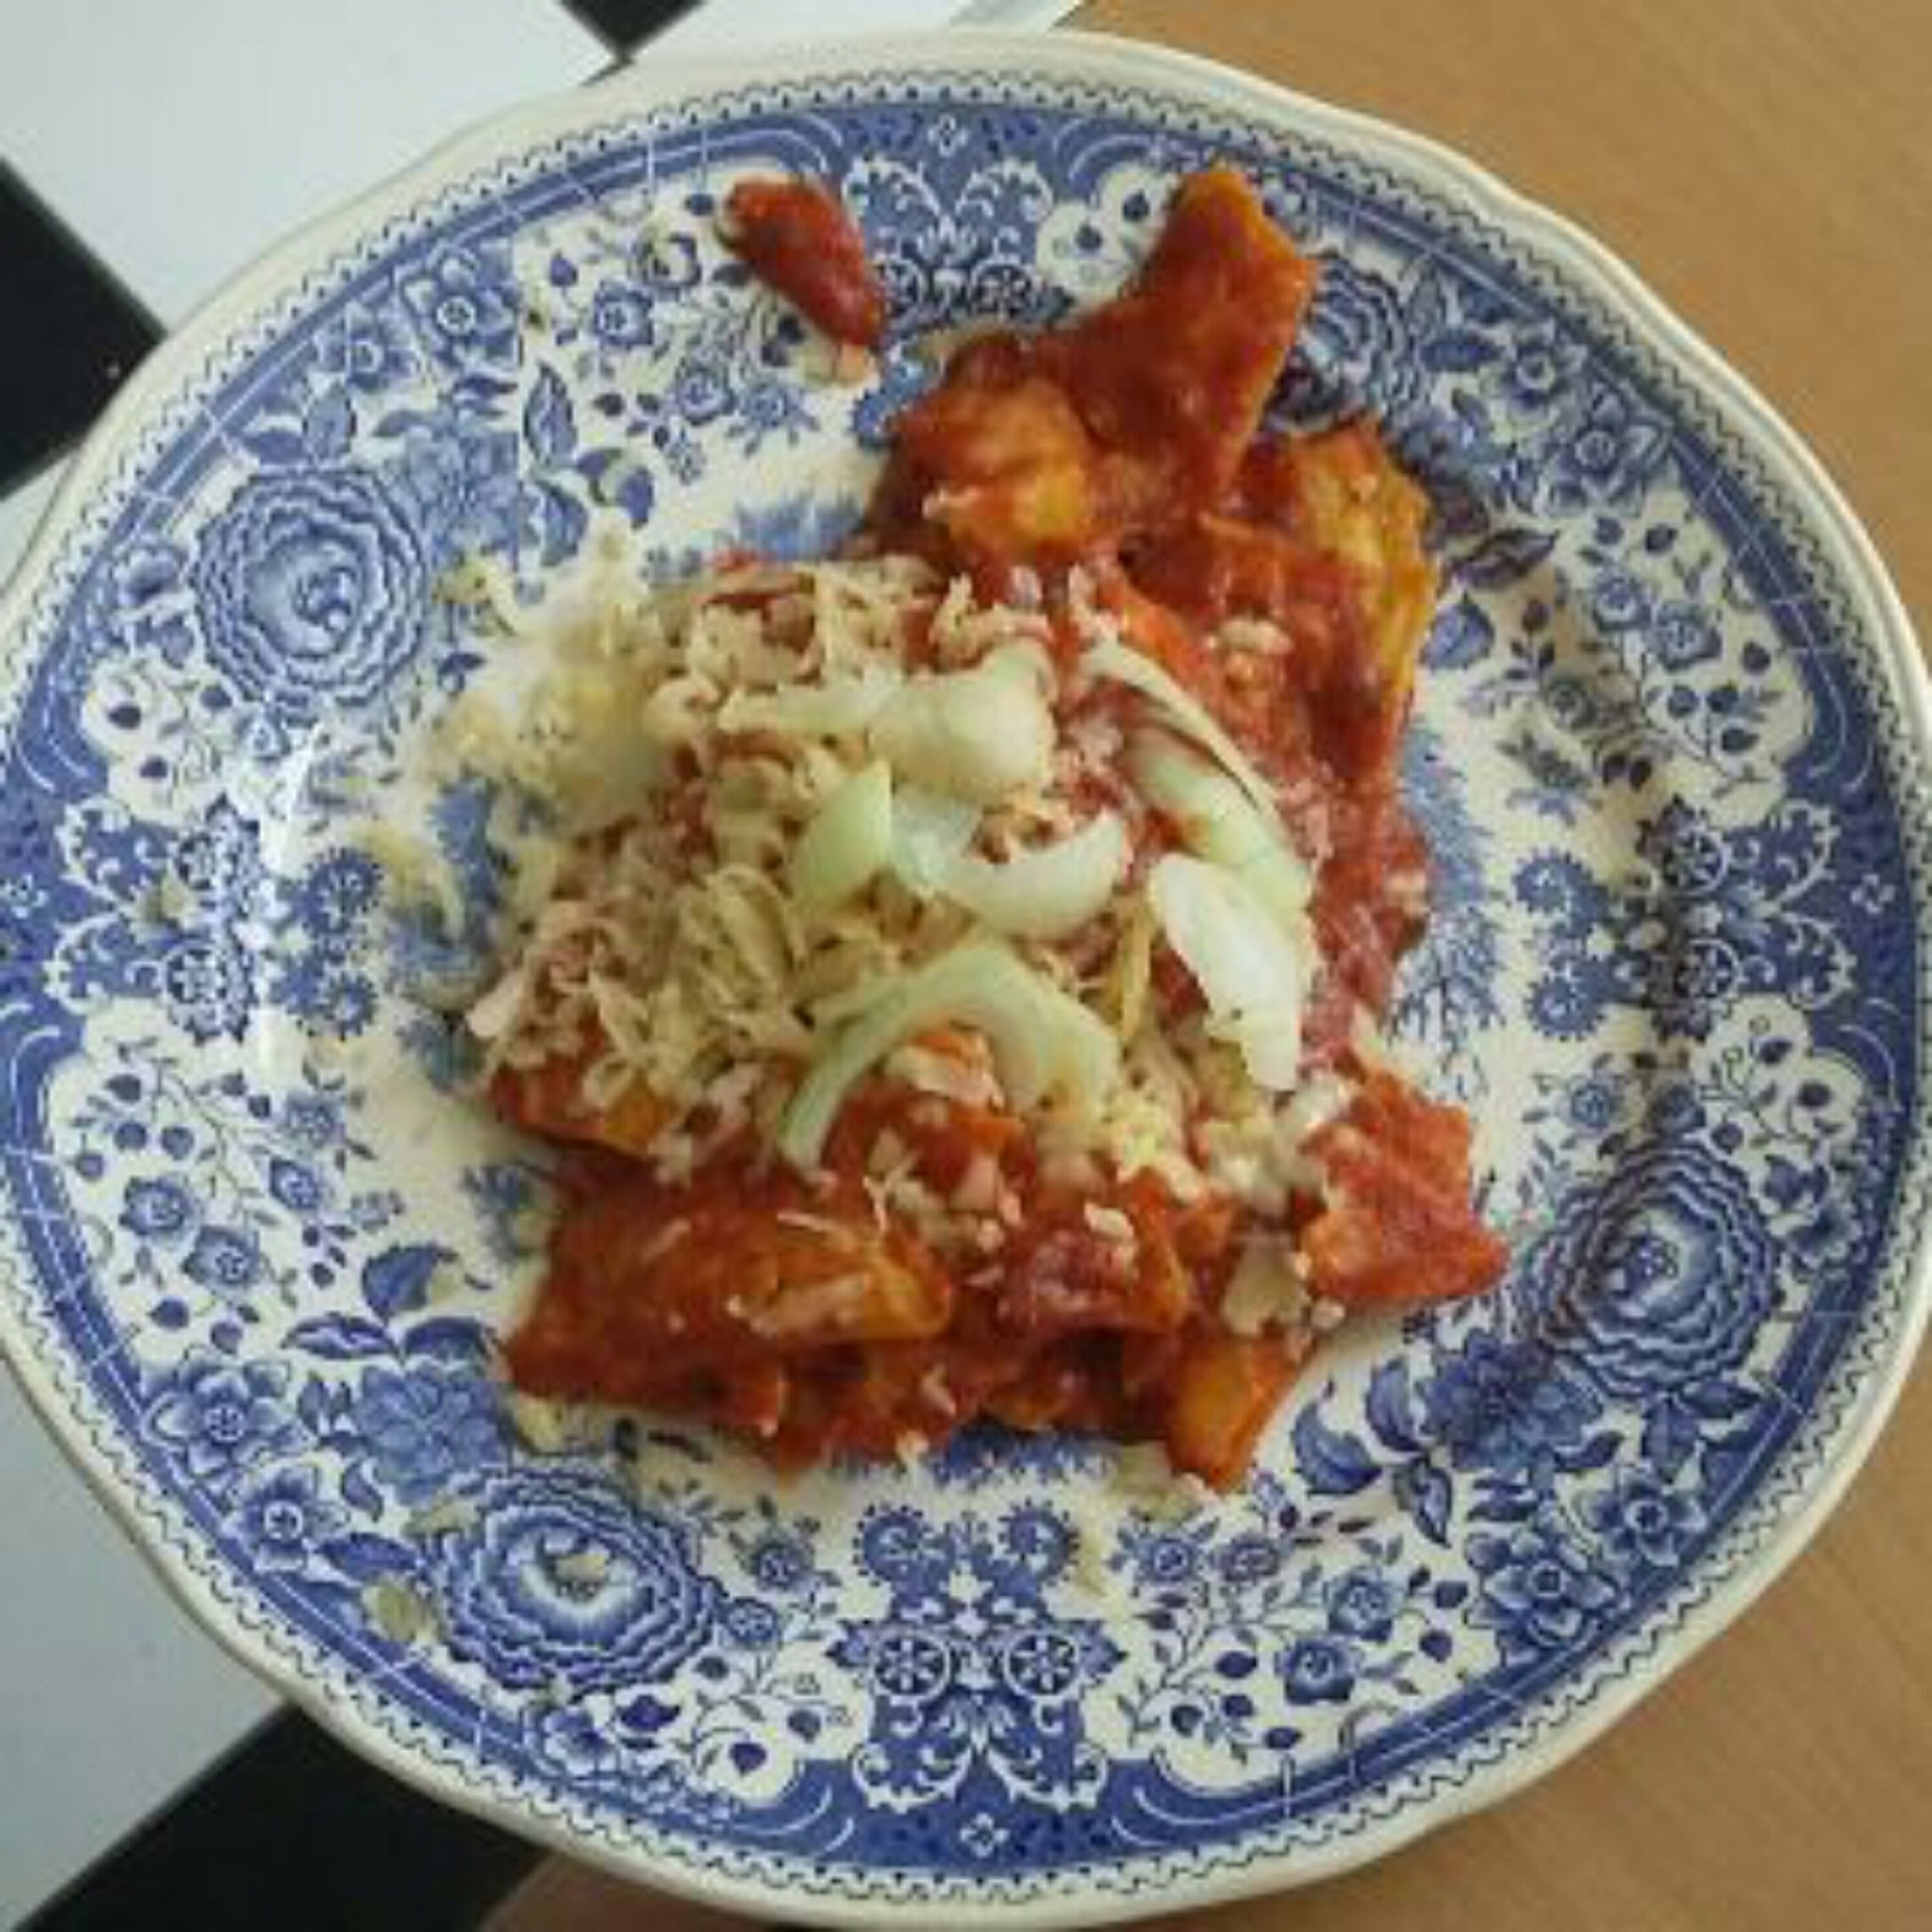 Red chilaquiles